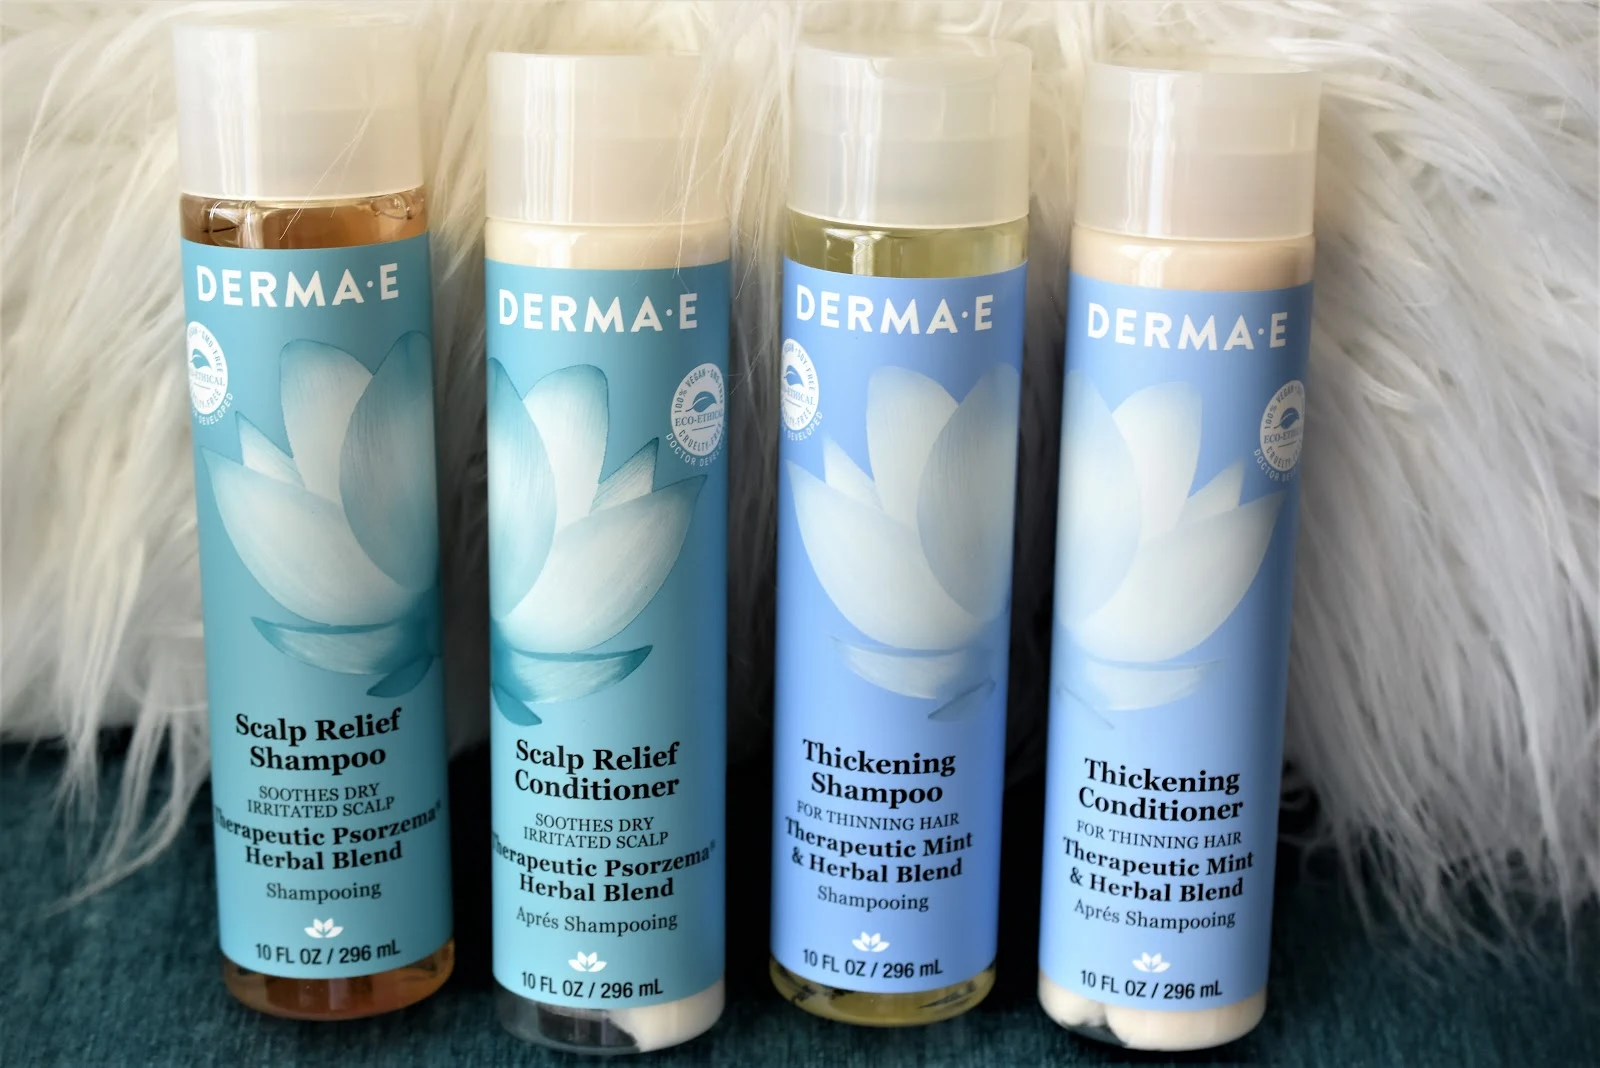 Get Thicker, Fuller, Healthy Hair with DERMA-E Haircare Products